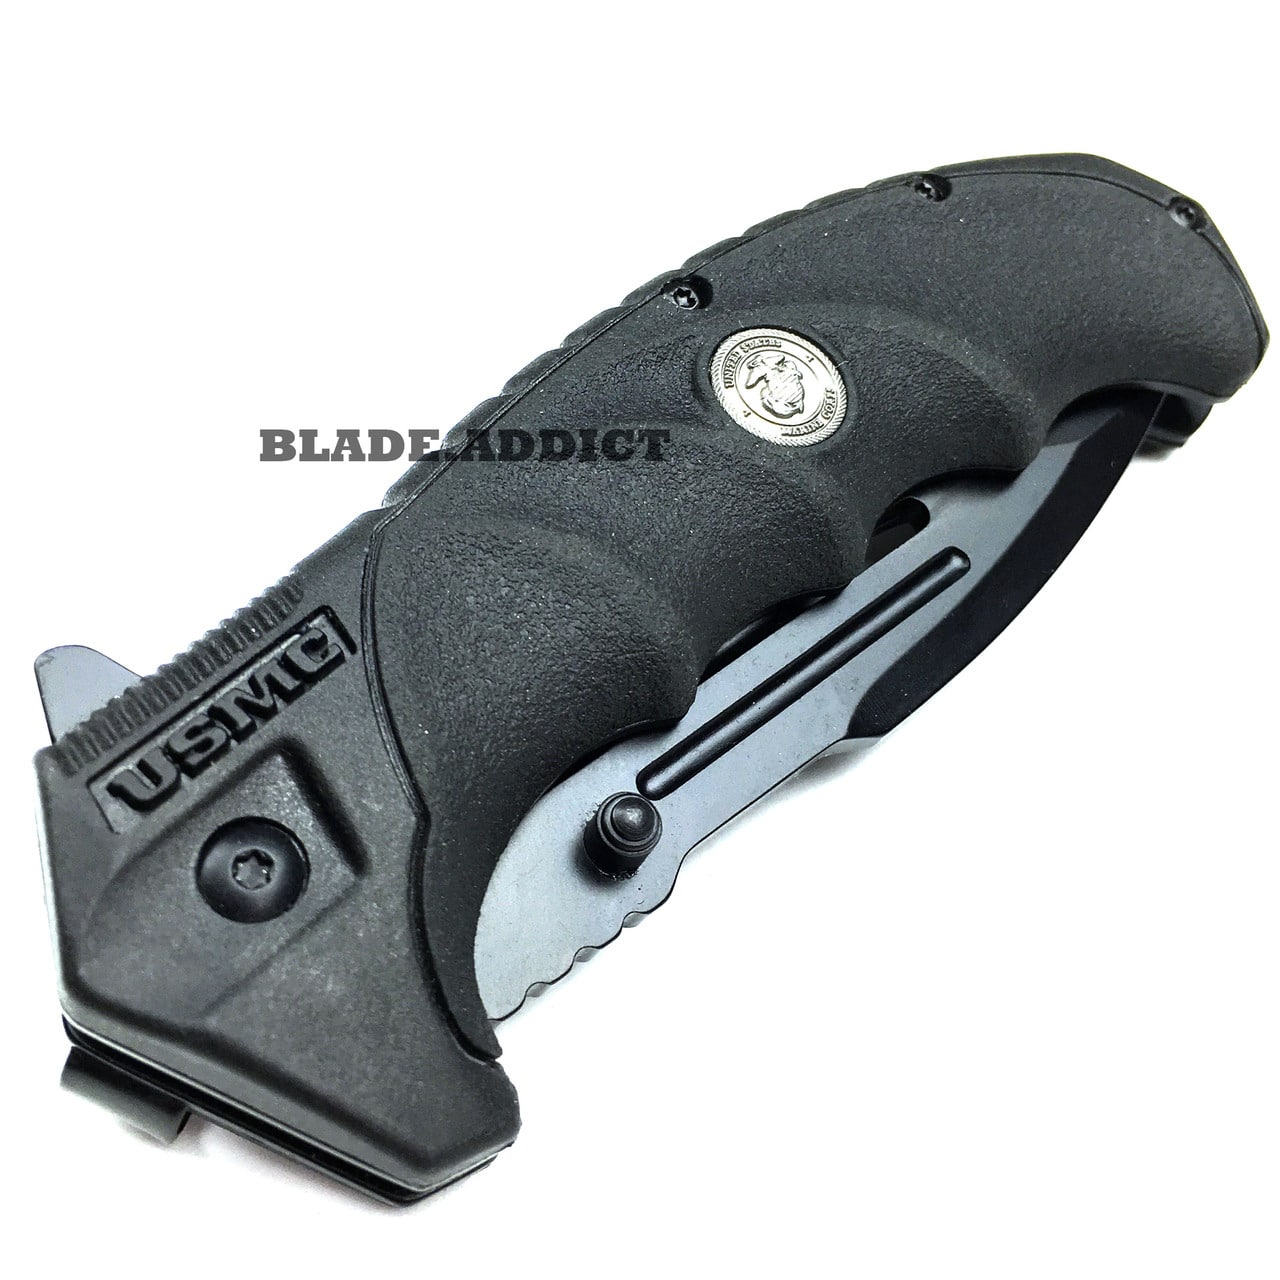 MTECH USMC MARINES Spring Assisted Open Tactical Rescue Folding POCKET KNIFE EDC